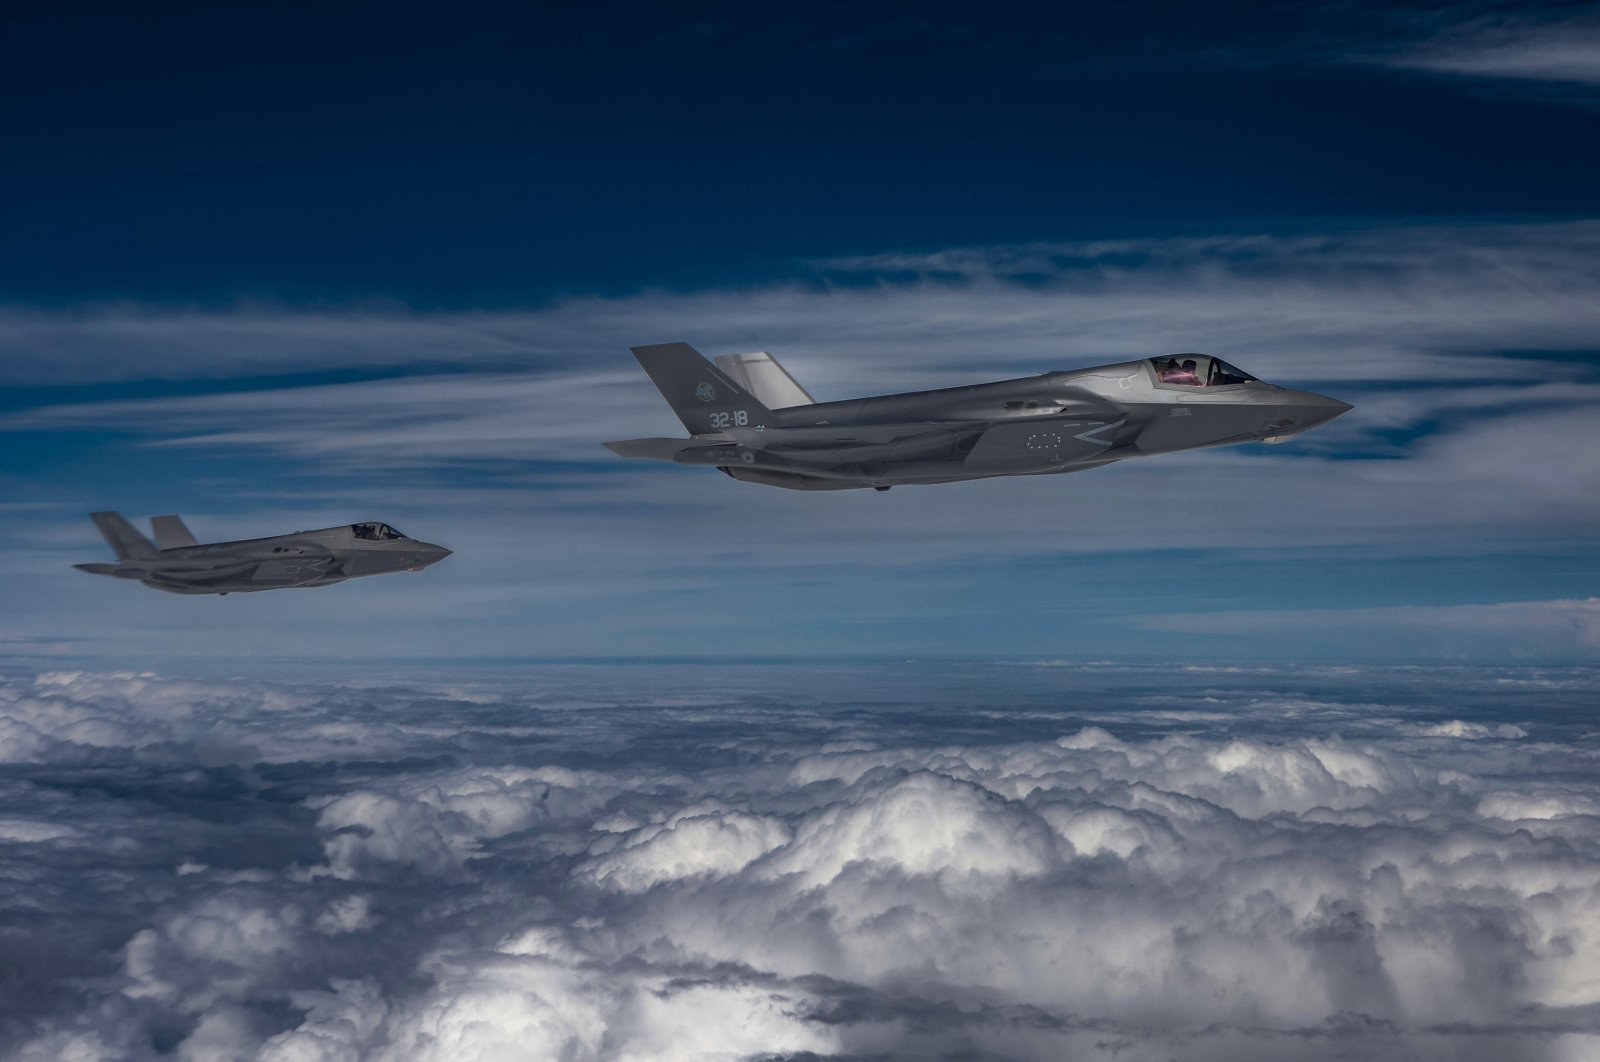 Two Italian Air Force F-35A multirole combat aircraft fly at an undisclosed location during the NATO-led defense operation &quot;Air Policing Northern Lightning III&quot; from the Keflavik Air Base in Iceland, June 27, 2022. (EPA Photo)